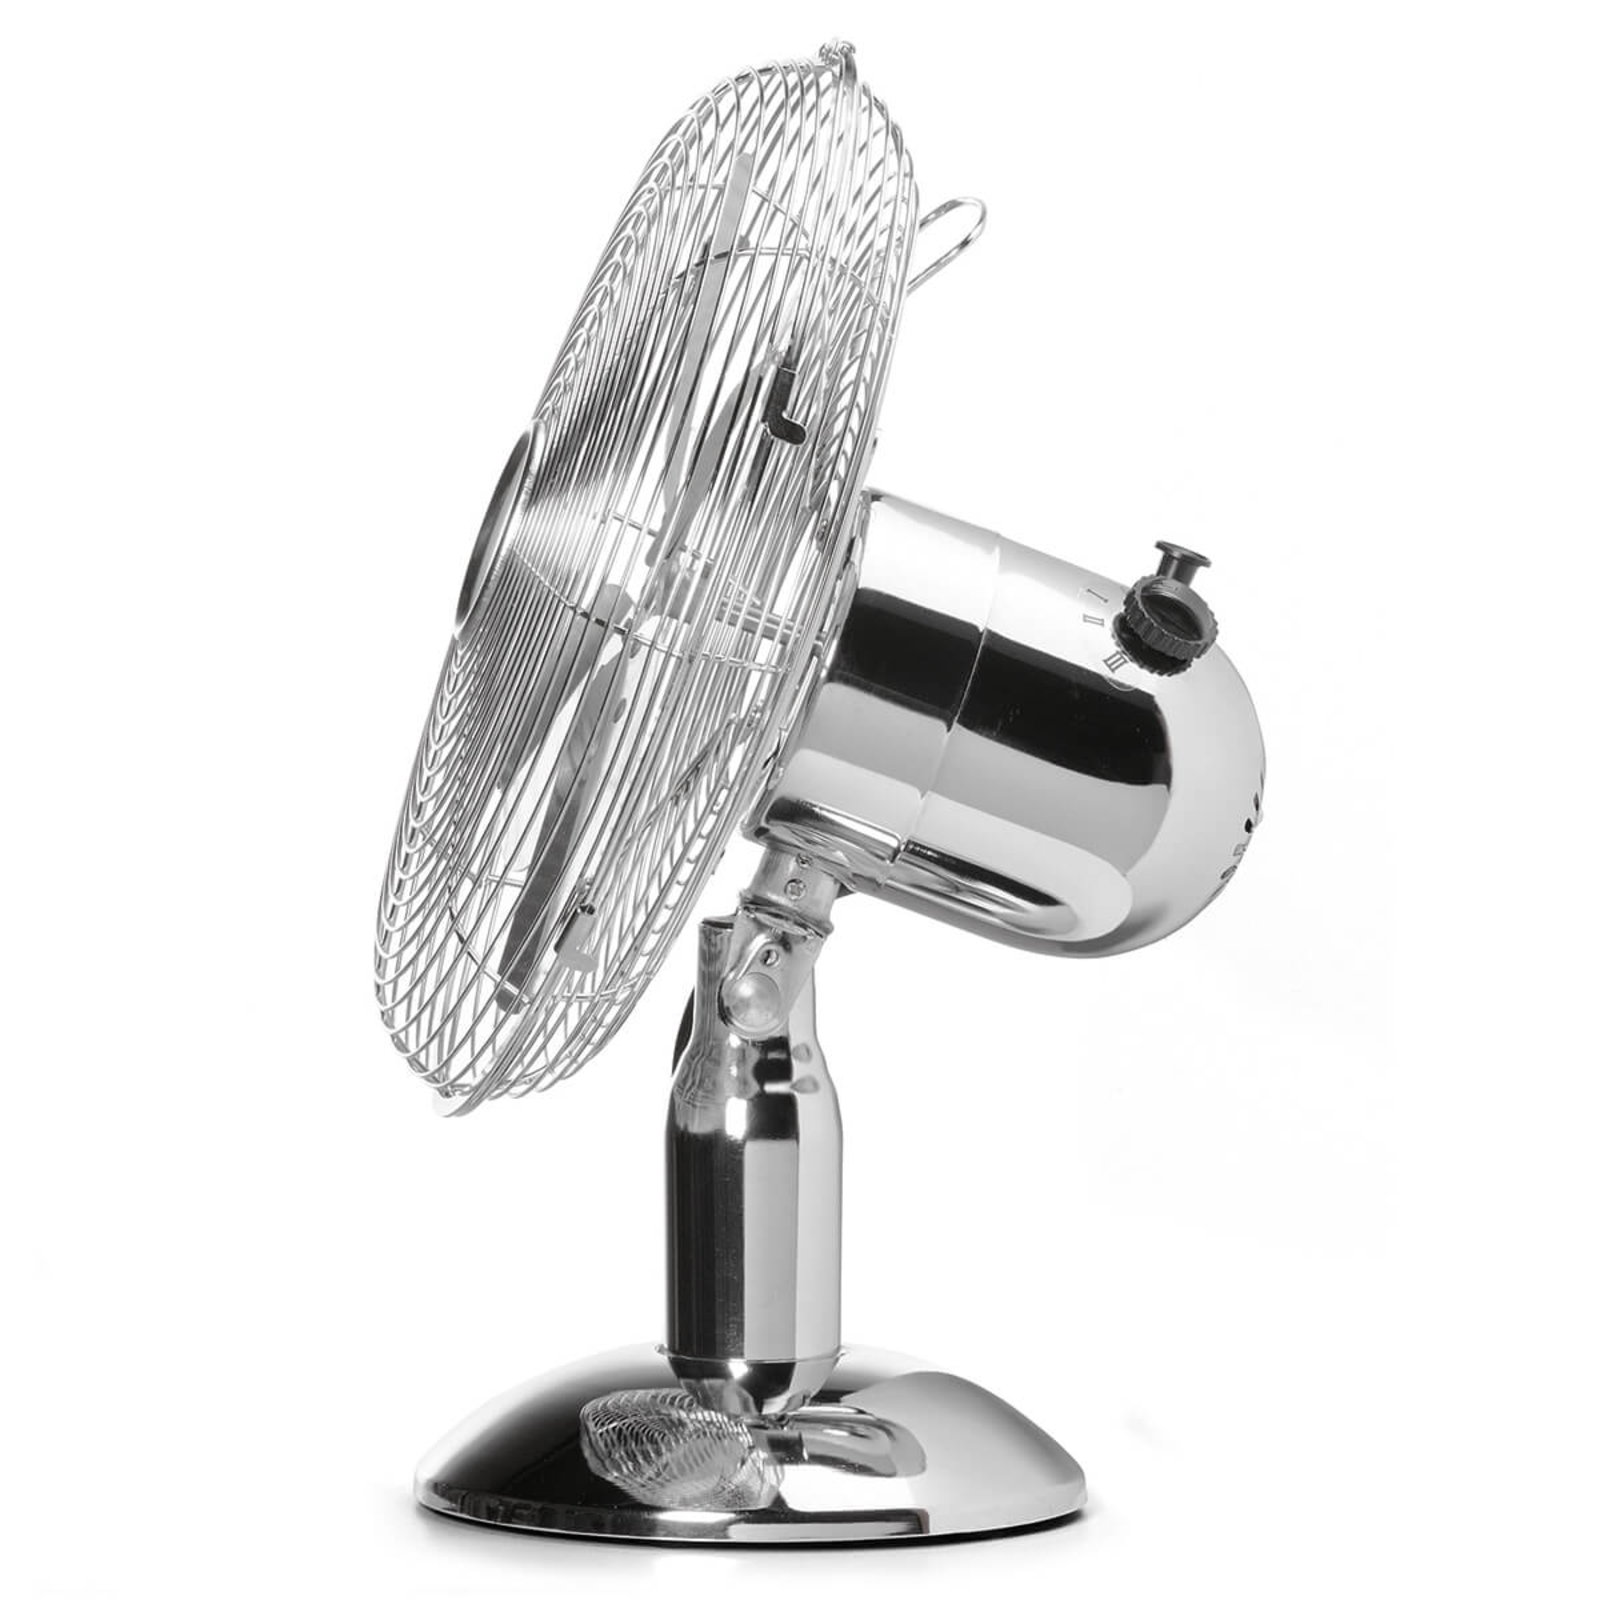 Three positions can be selected - VE5953 table fan